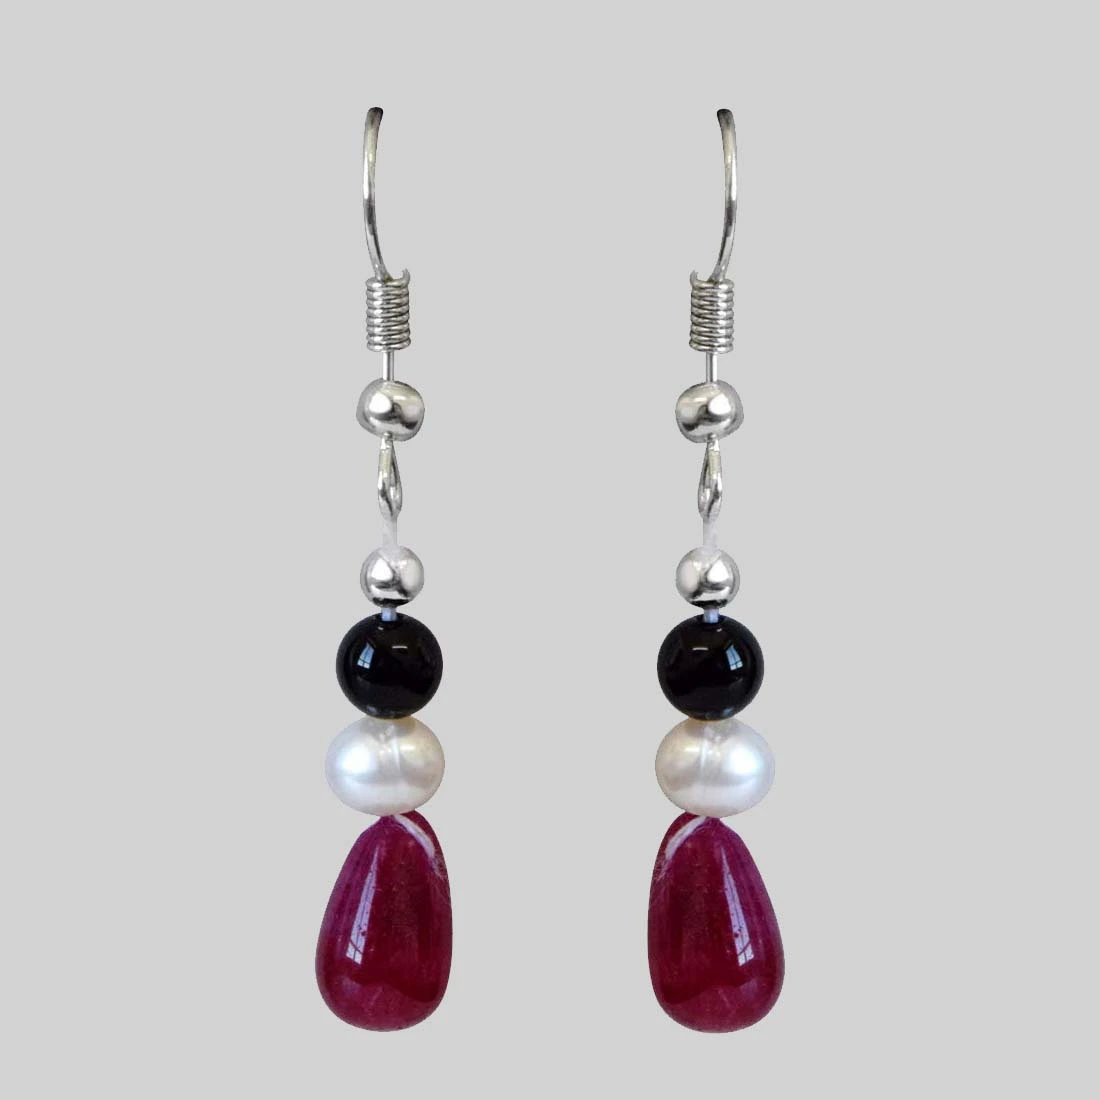 Real Red Drop Ruby, Black Onyx, Silver Plated Beads and Freshwater Pearls Hanging Earrings for Women (SE344)